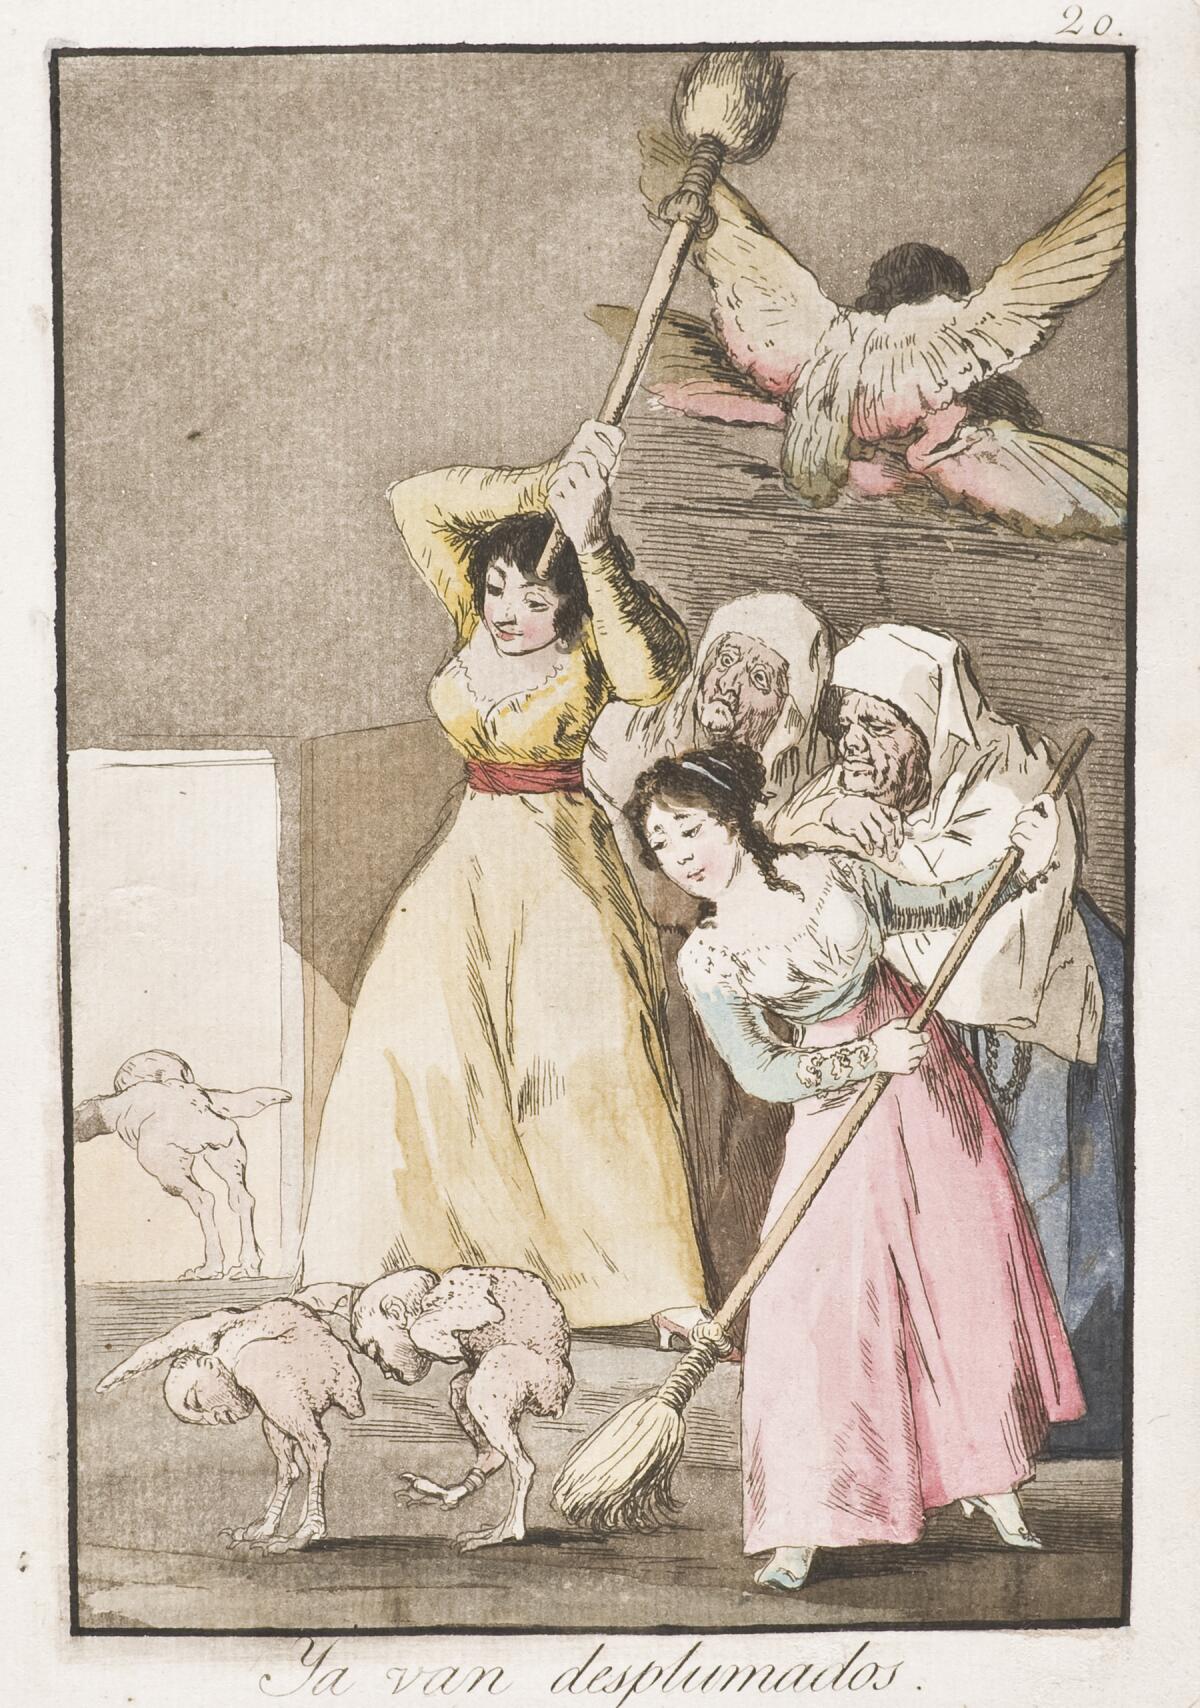 In a Francisco de Goya etching from 1799 titled "There They Go Plucked (i.e. Fleeced)," women look at bird-like creatures.